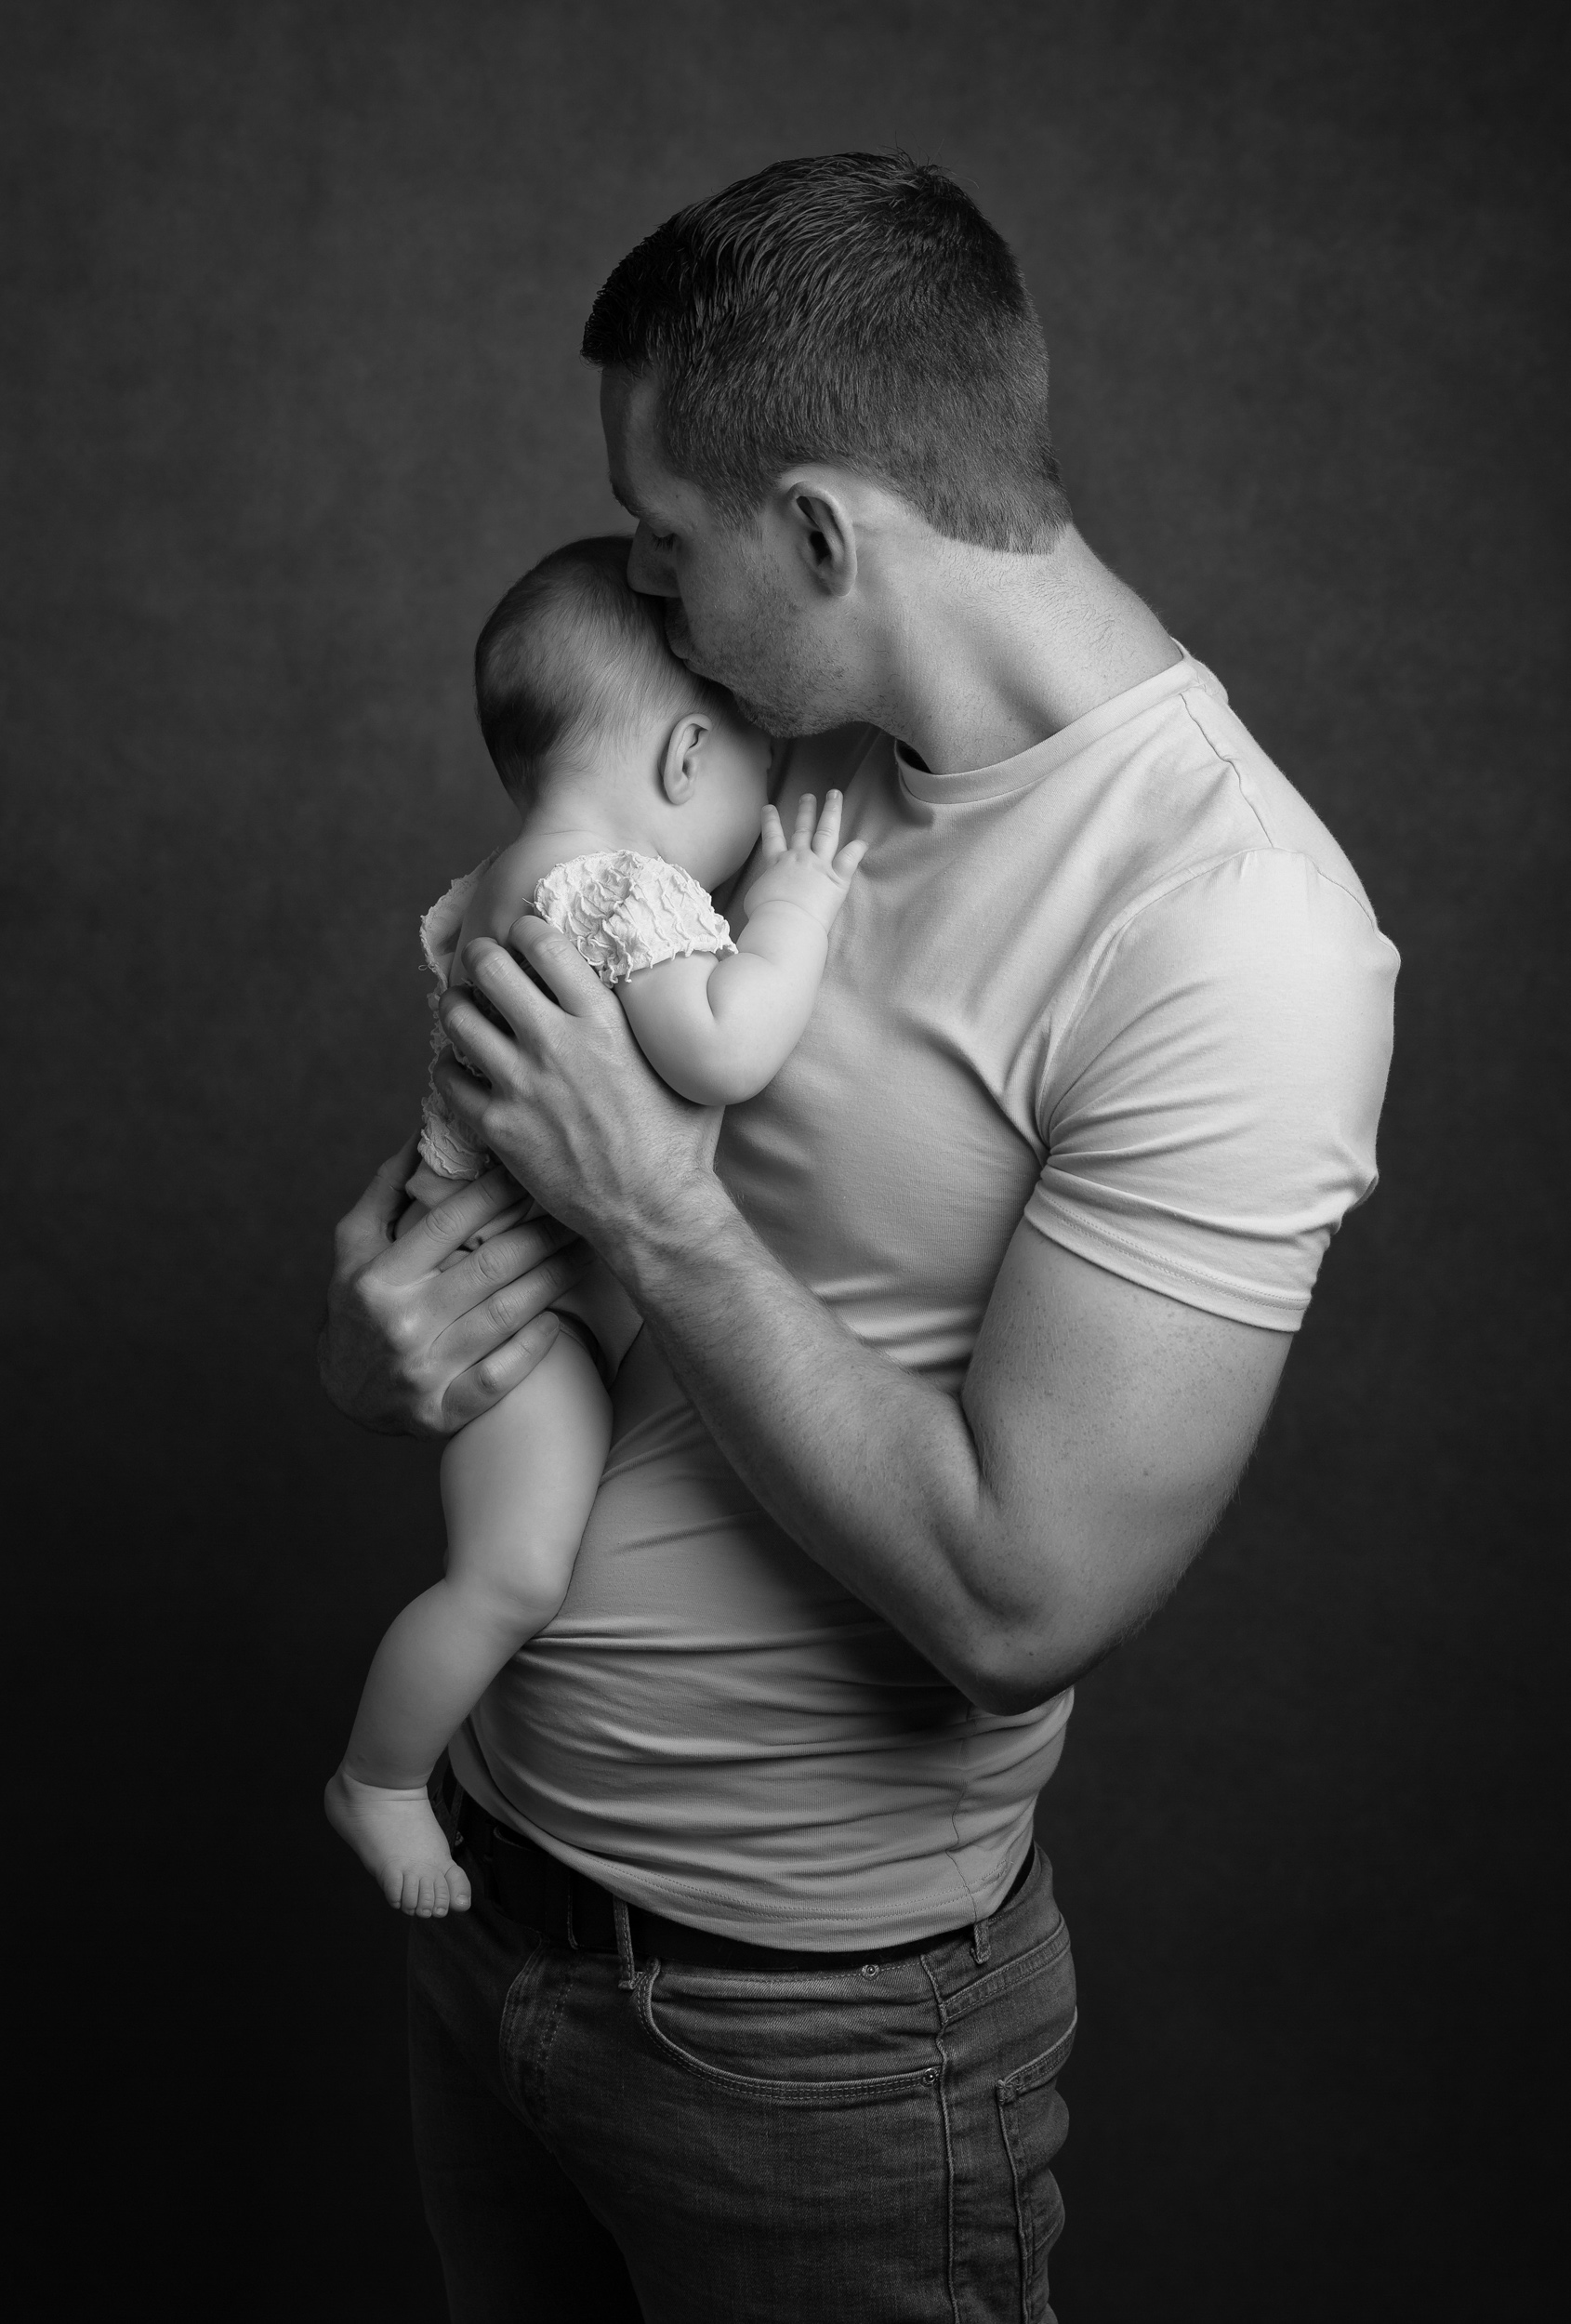 Daddy and baby having a cuddle taken during a milestone portrait session in Sandbach, Cheshire